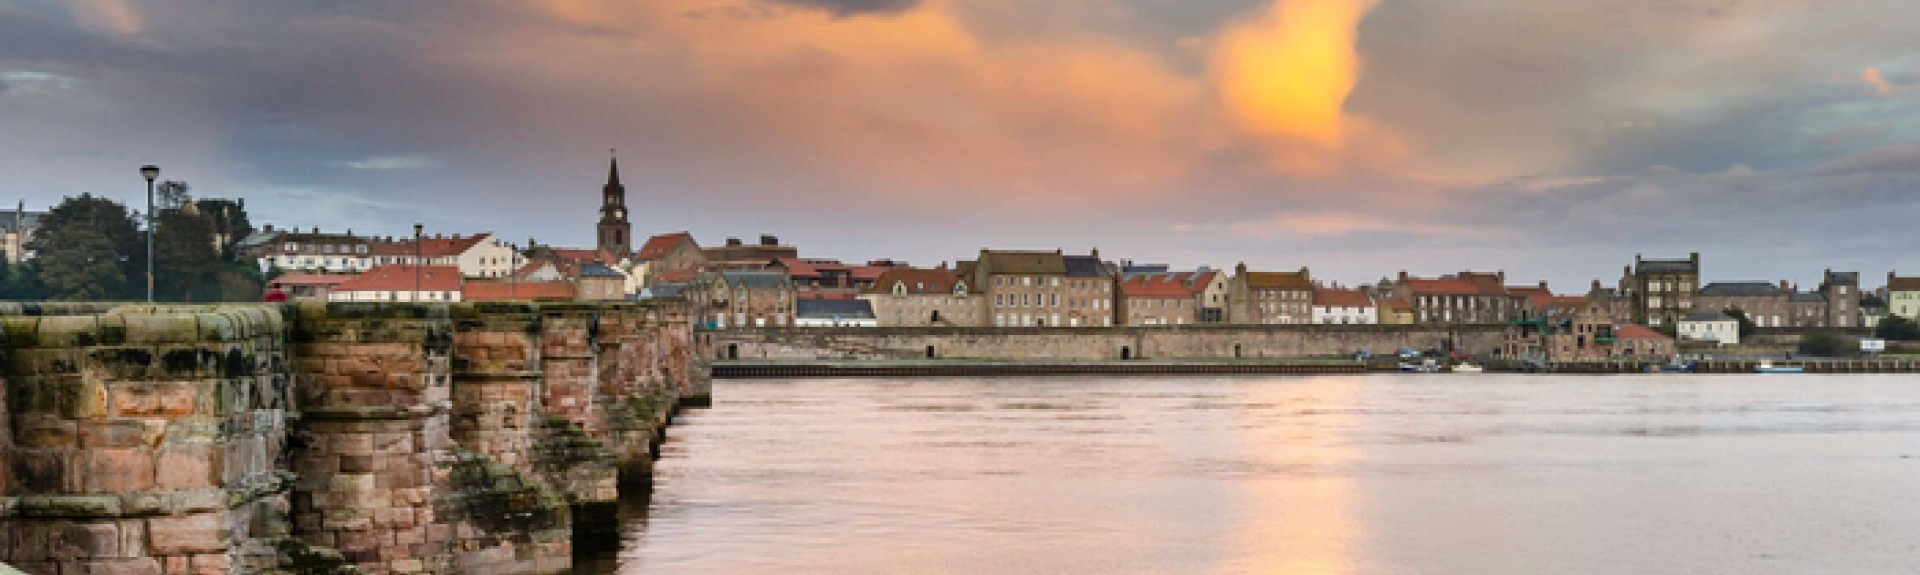 A waterside view at sunset in Berwick-upon-Tweed. The stone buttresses of anold bridge lead towards the far bank lined with old 3-storey houses.